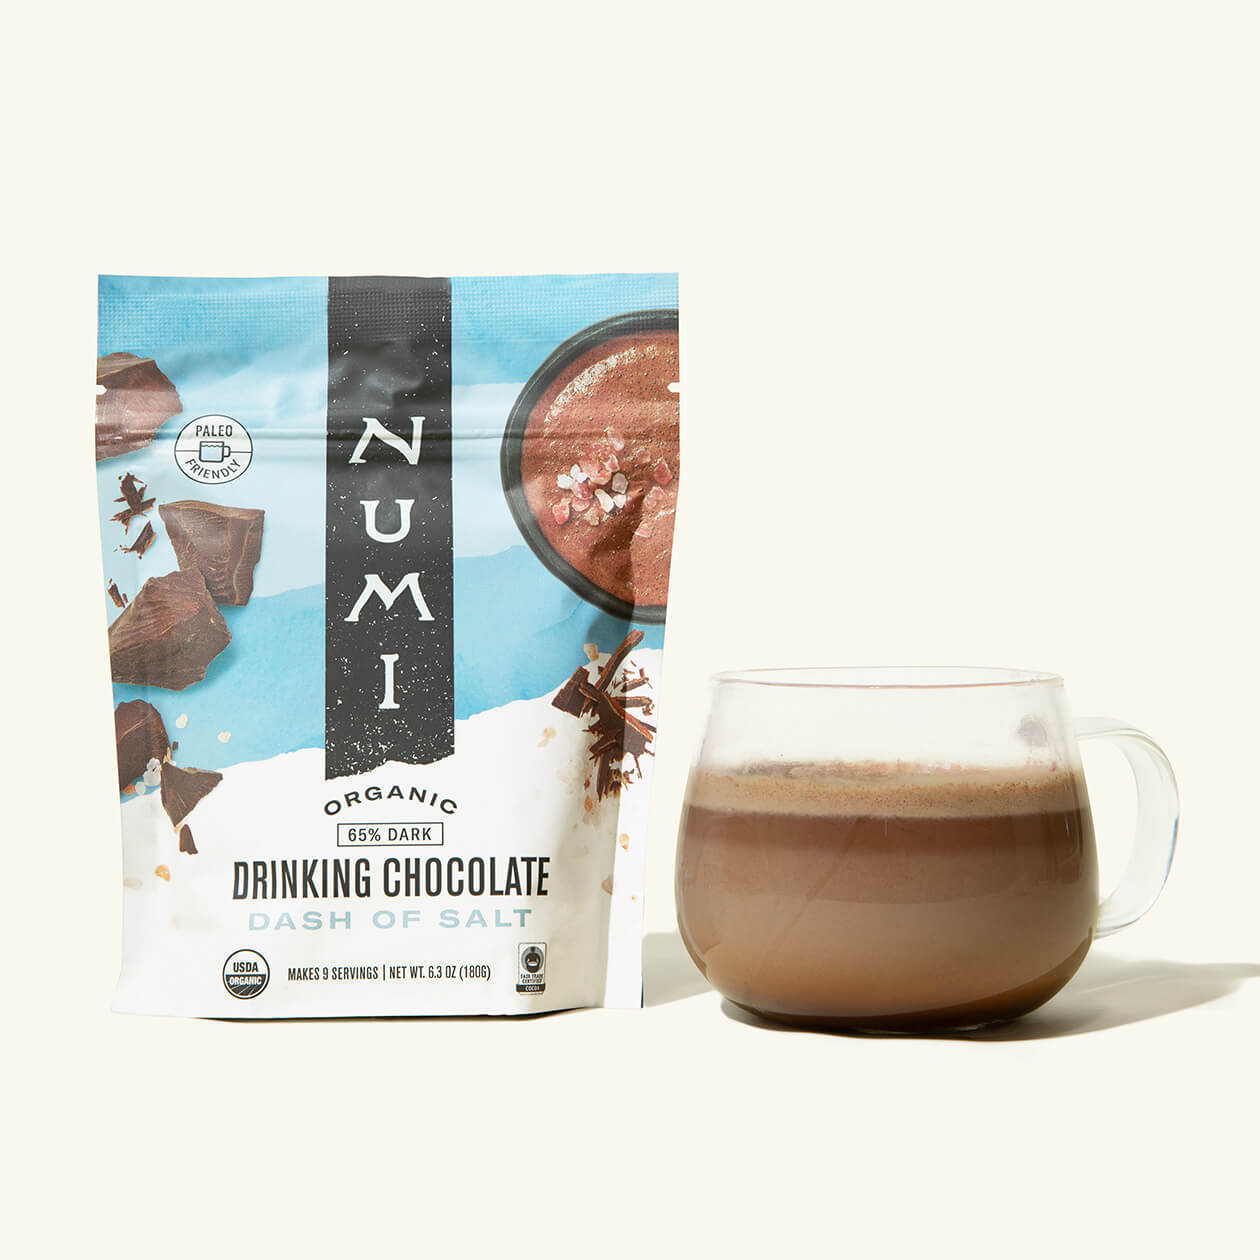 A pouch of Numi organic Drinking Chocolate, Dash of Salt Flavor, next to a cup of hot chocolate